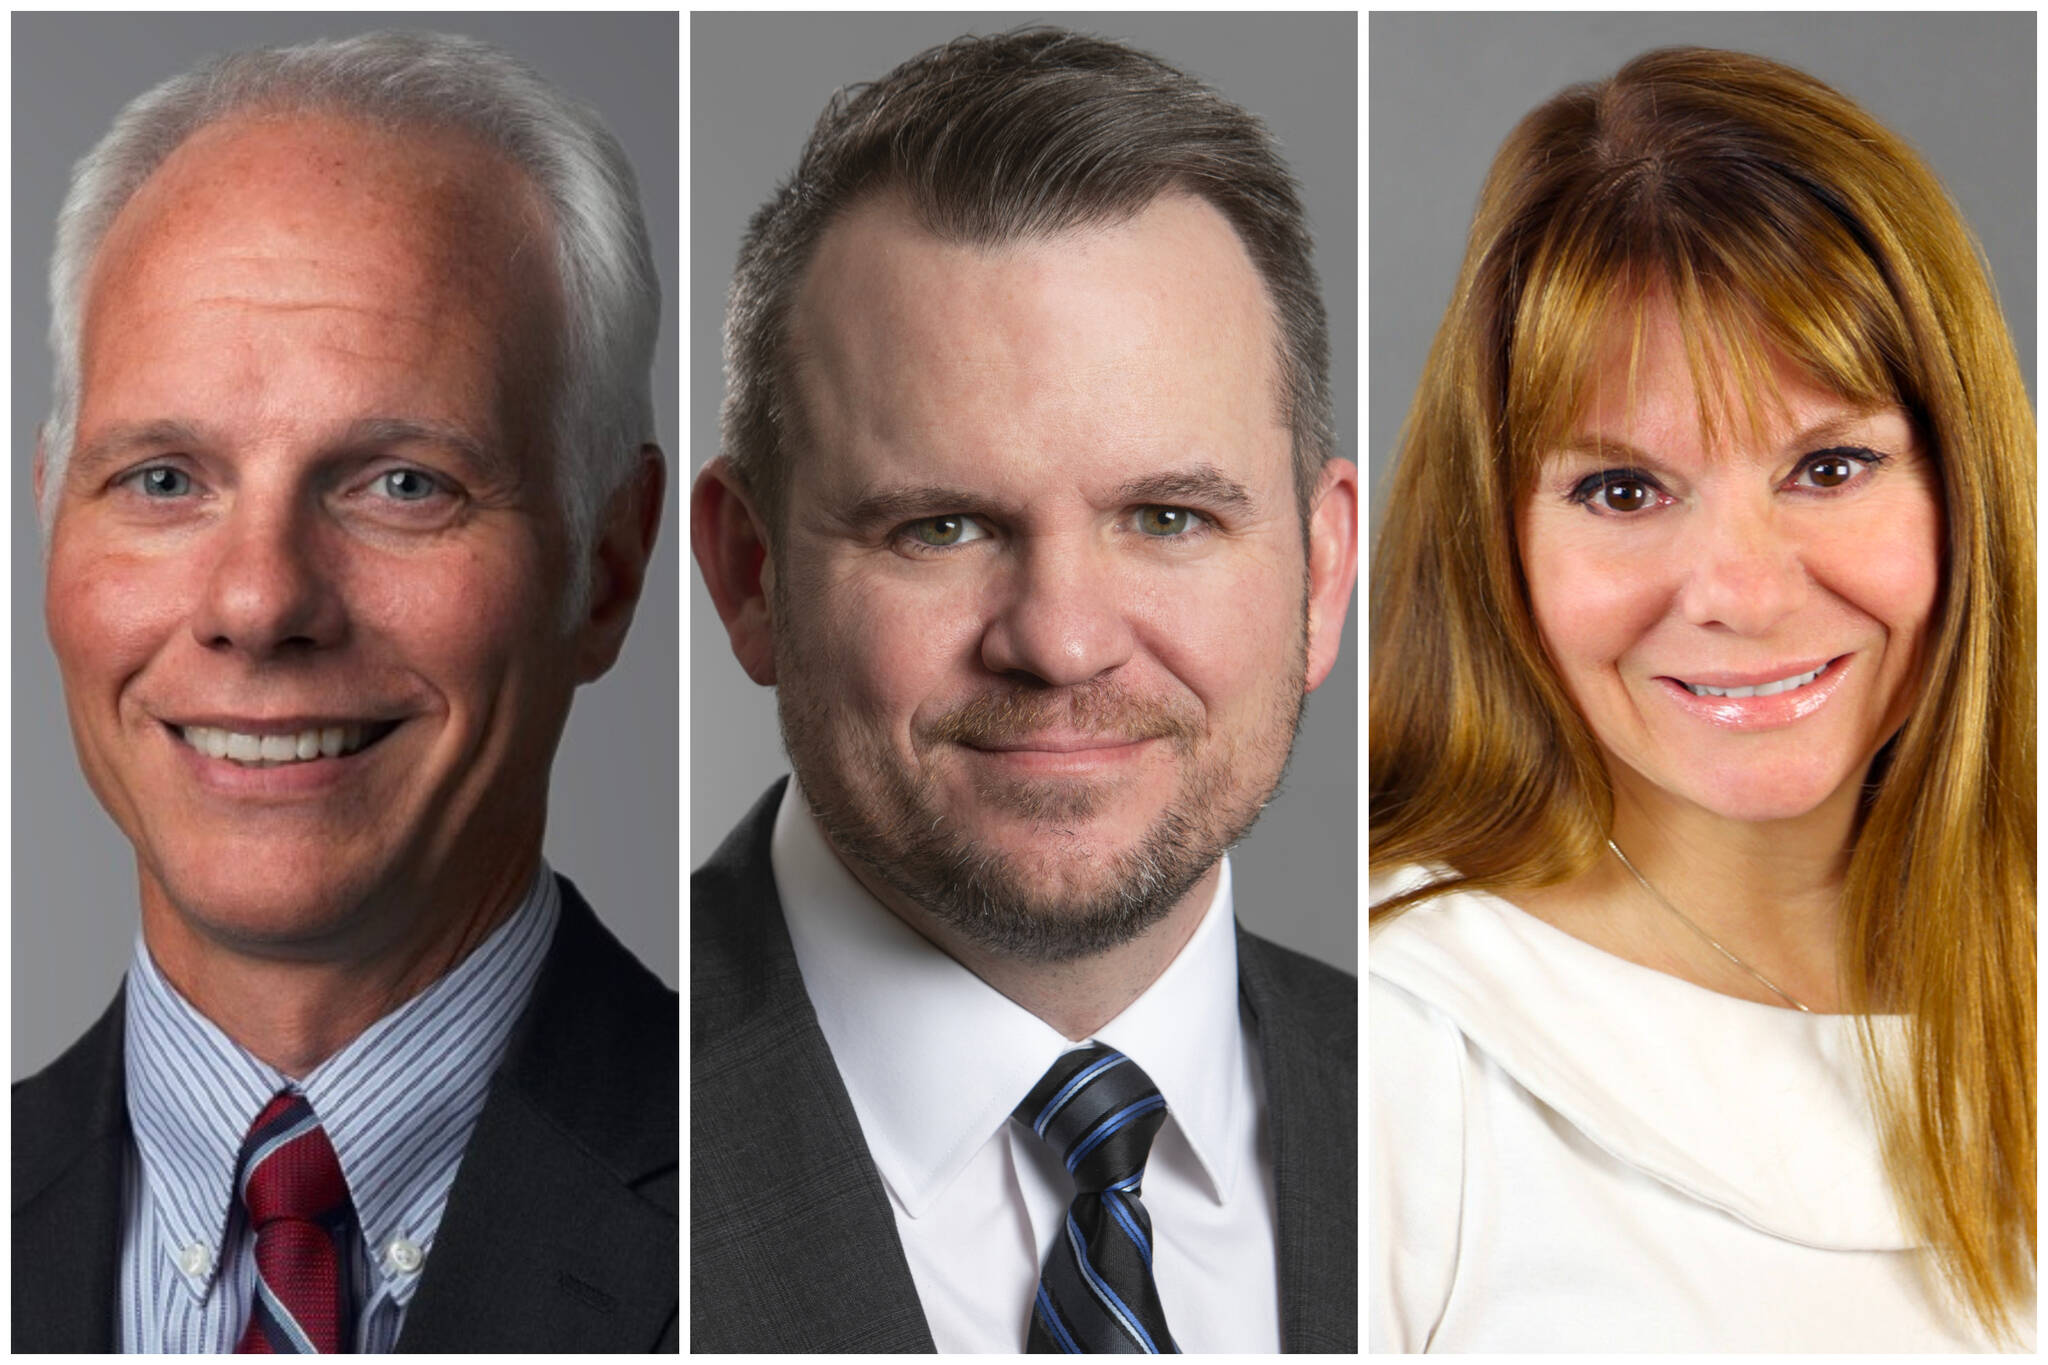 This combination photo shows three finalists for the Alaska Permanent Fund Corp.’s CEO position. They are Deven Mitchell, Morgan Neff and Melanie Hardin . (State of Alaska file photos and EQIS Capital Management Inc. media photo)